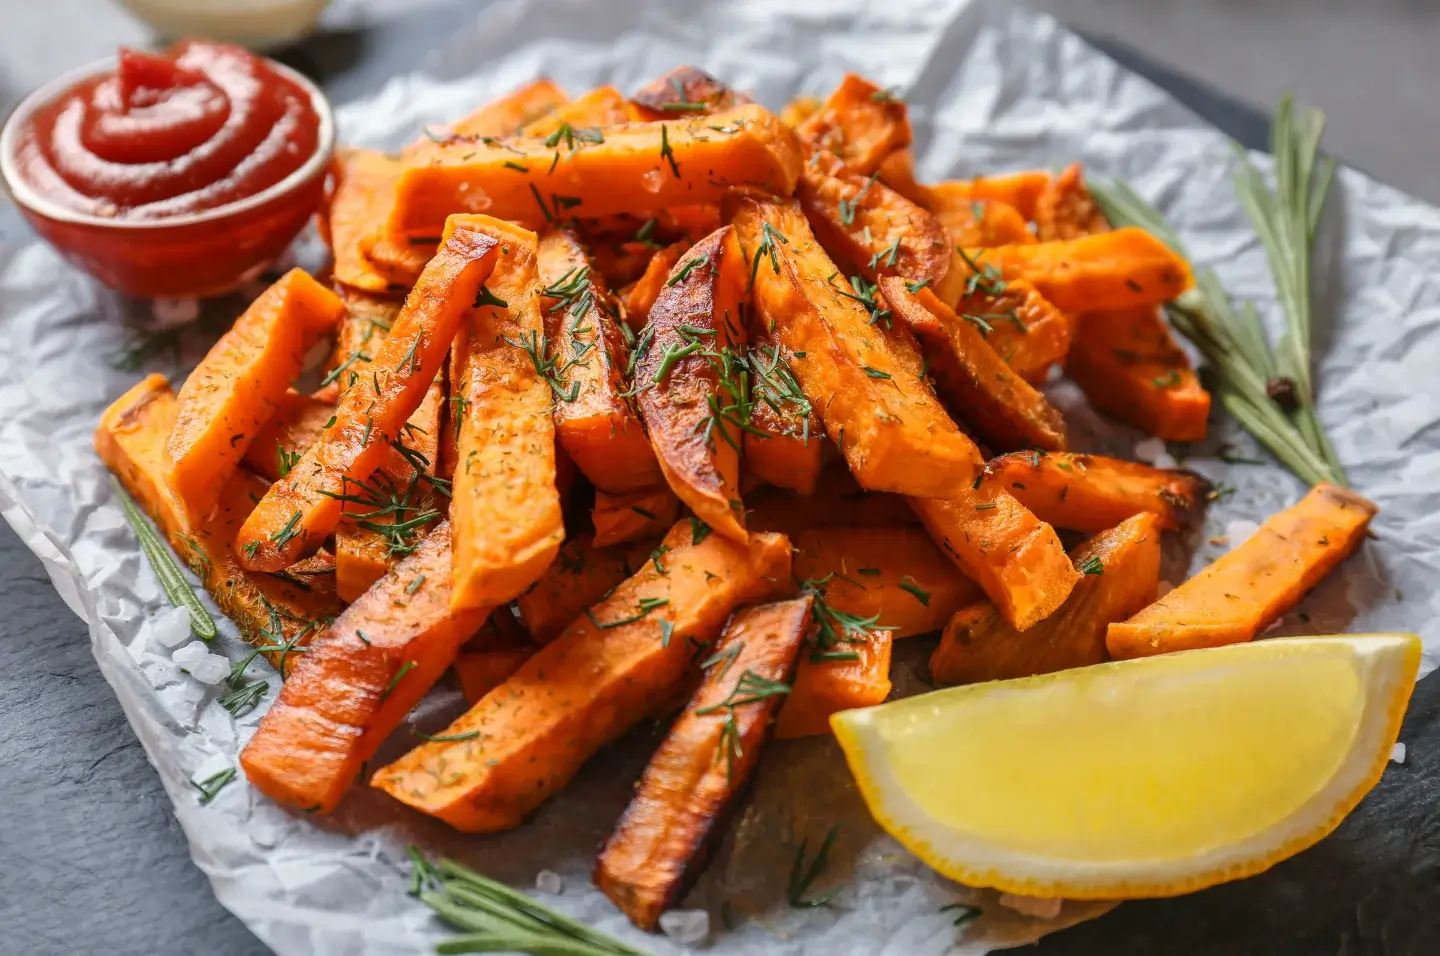 Prepared sweet potato fries on a plate beside a bottle of ketchup